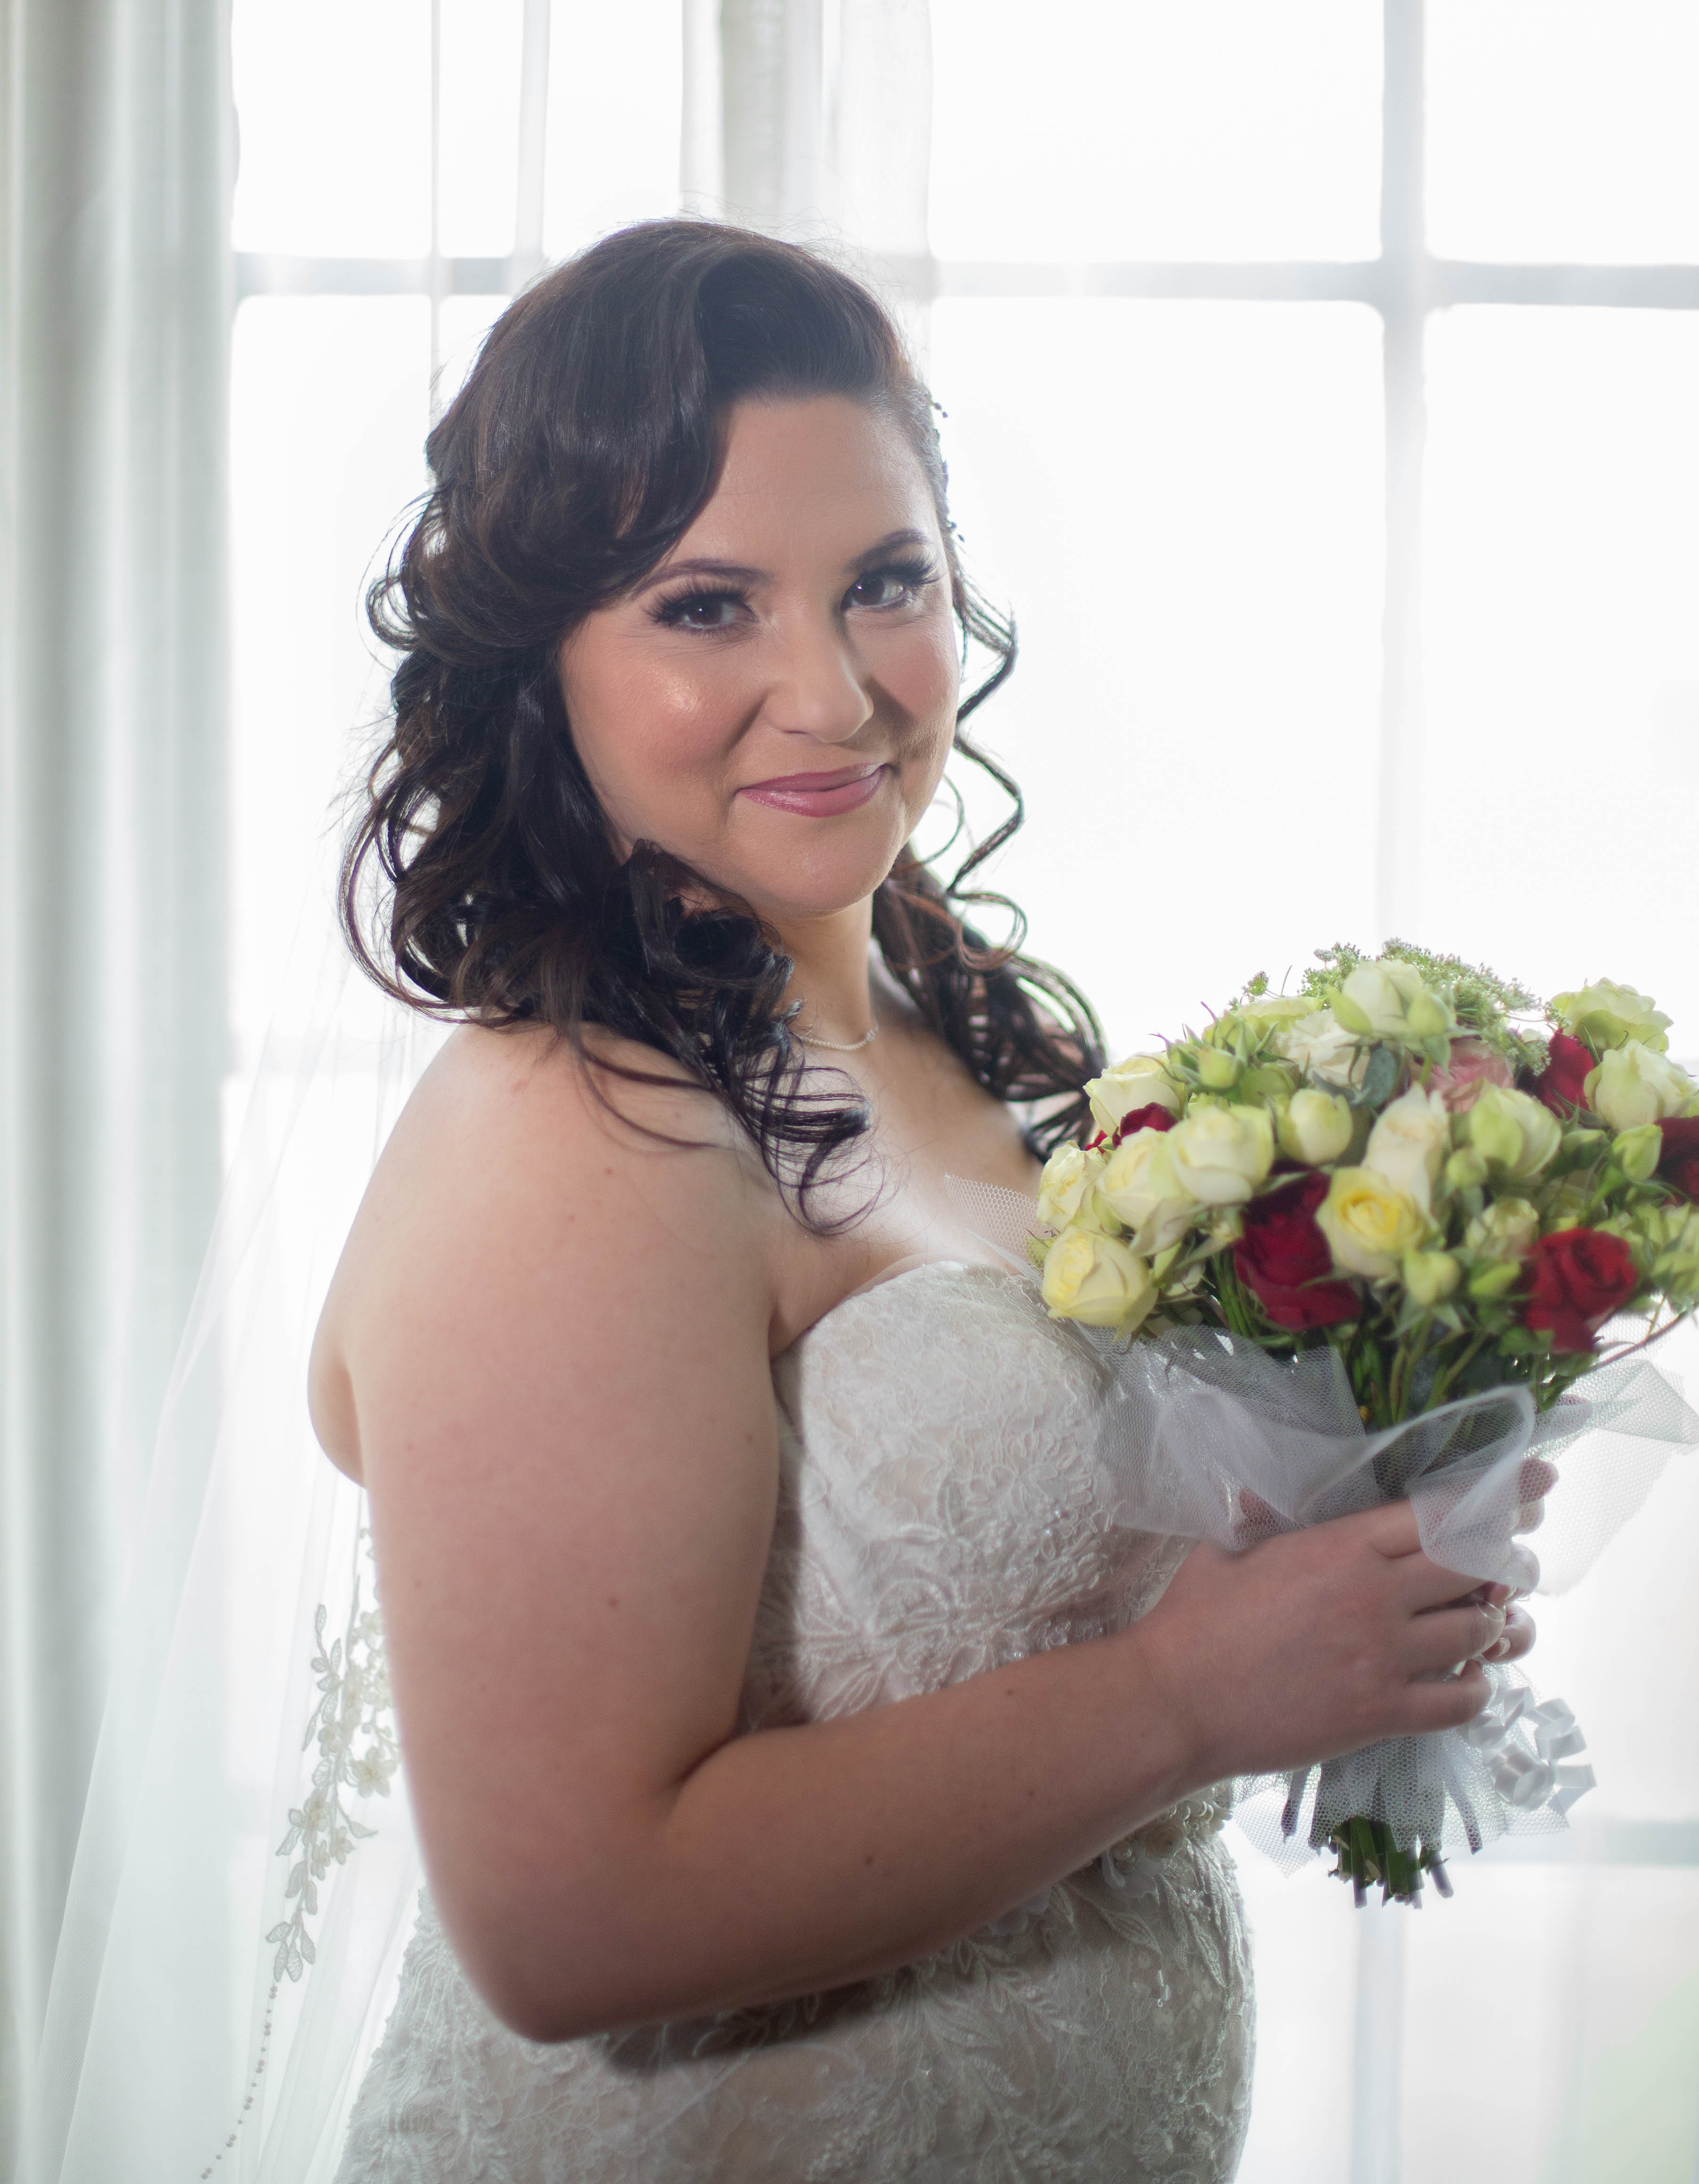 WEDDING PHOTOGRAPHY AND VIDEOGRAPHY PACKAGES | 5 REASONS TO HIRE THE SAME COMPANY